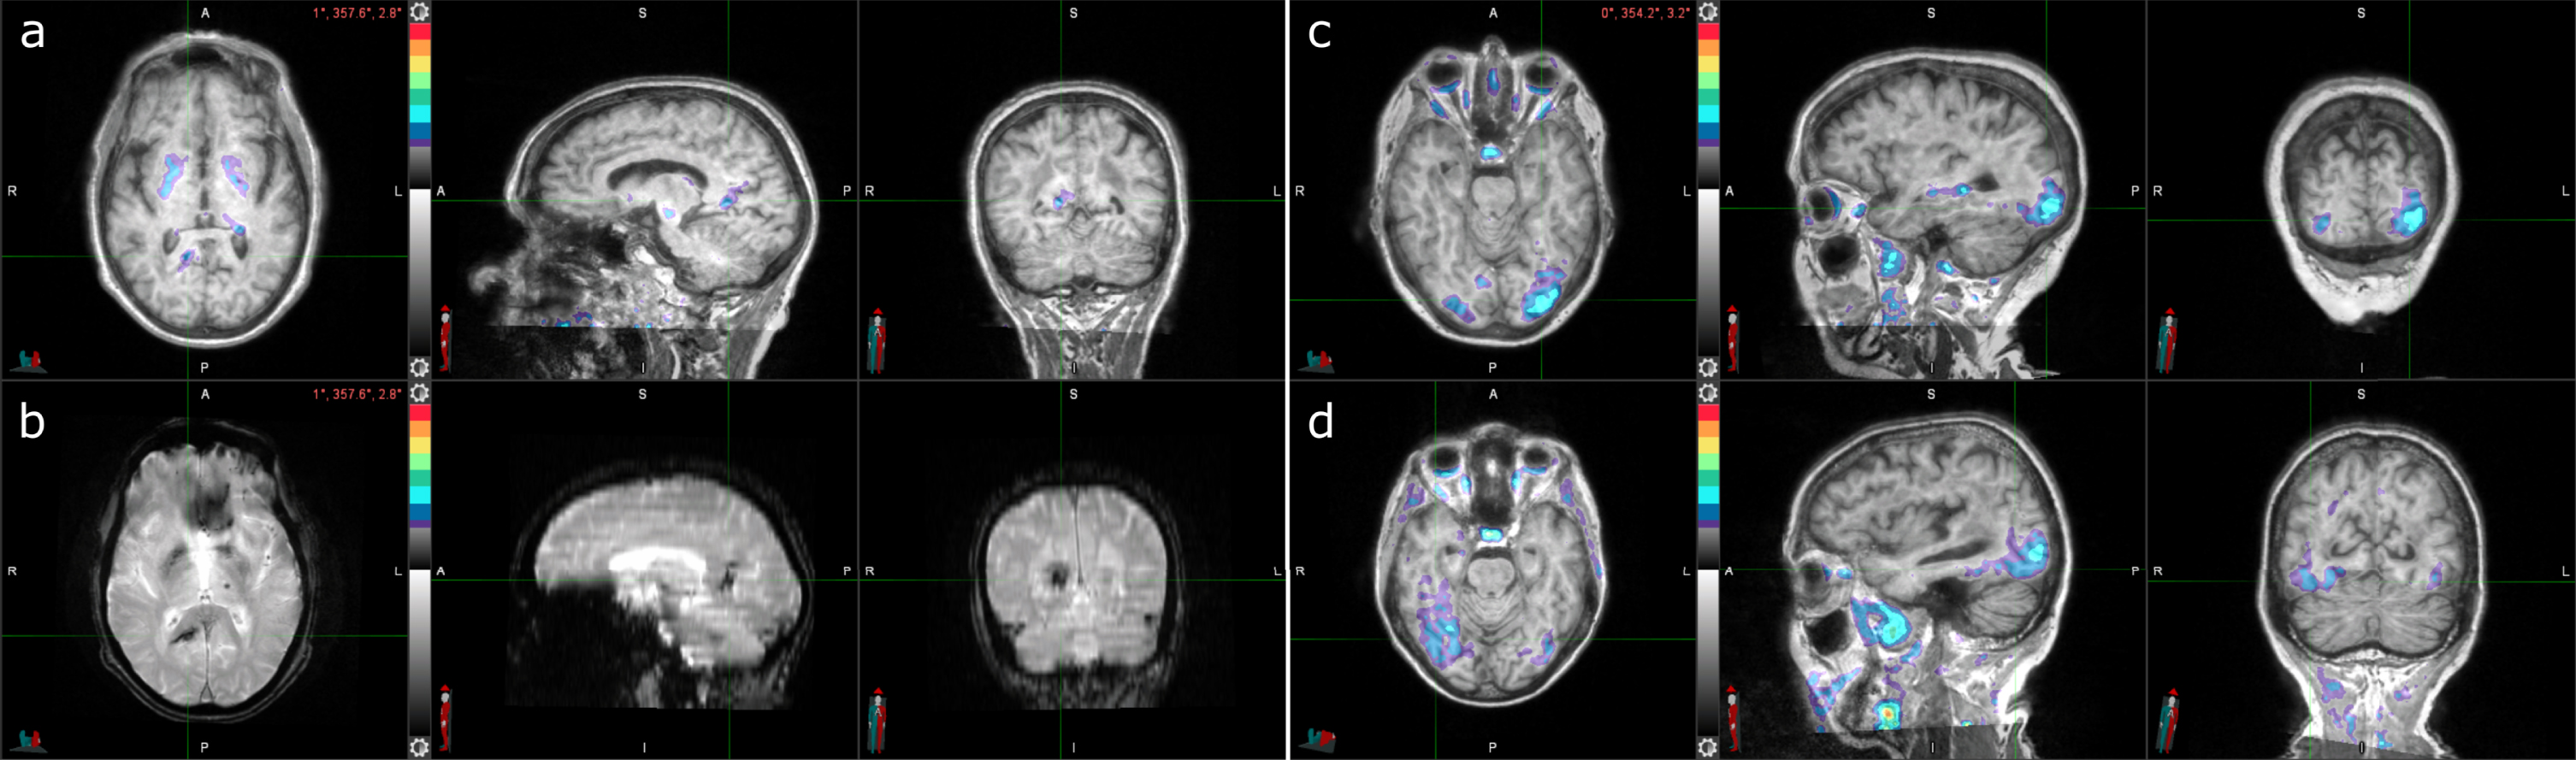 Three cases with tau-positive visual interpretations, but tau-negative SUVRs. a) Tau PET coregistered with MRI of a male participant in his 80s with elevated right precuneus uptake. b) Corresponding T2*-weighted MRI showing a hypointensity (indicated by the crosshair) that colocalizes with the elevated right precuneus uptake from (a). c) Tau PET coregistered with MRI of a female participant in her 70s with elevated occipital lobe uptake, left greater than right. d) Tau PET coregistered with MRI of a female participant in her 70s with elevated posterolateral temporal, occipital, and parietal/precuneus lobe uptake, right greater than left.